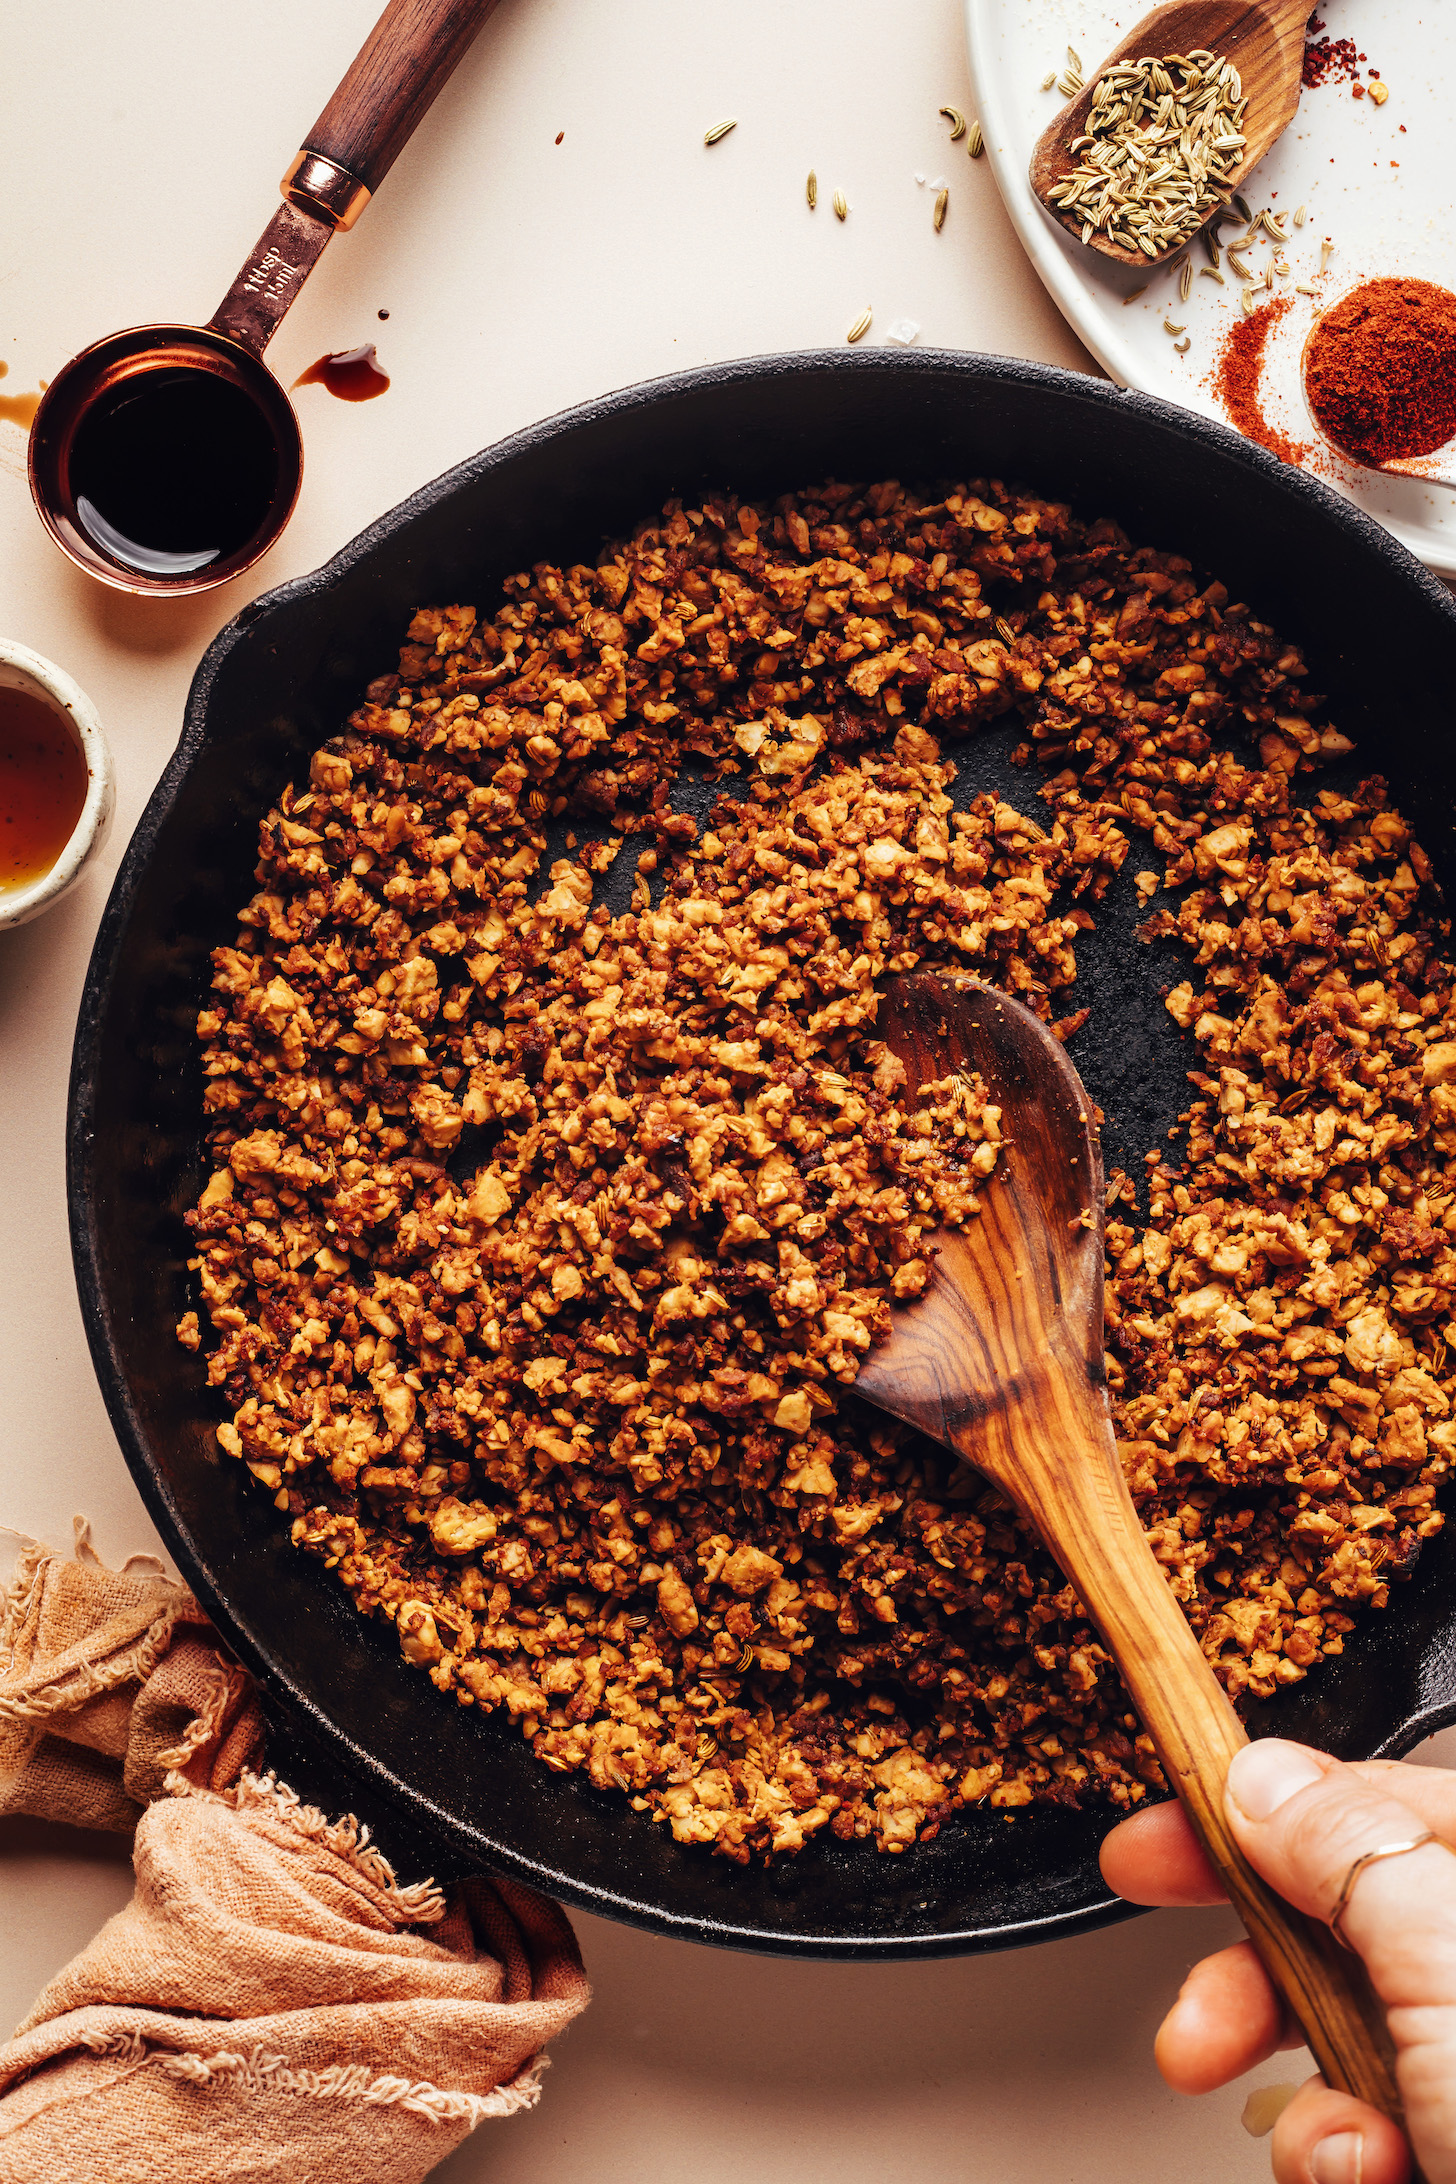 Wooden spoon stirring vegan tempeh sausage crumbles in a cast iron skillet